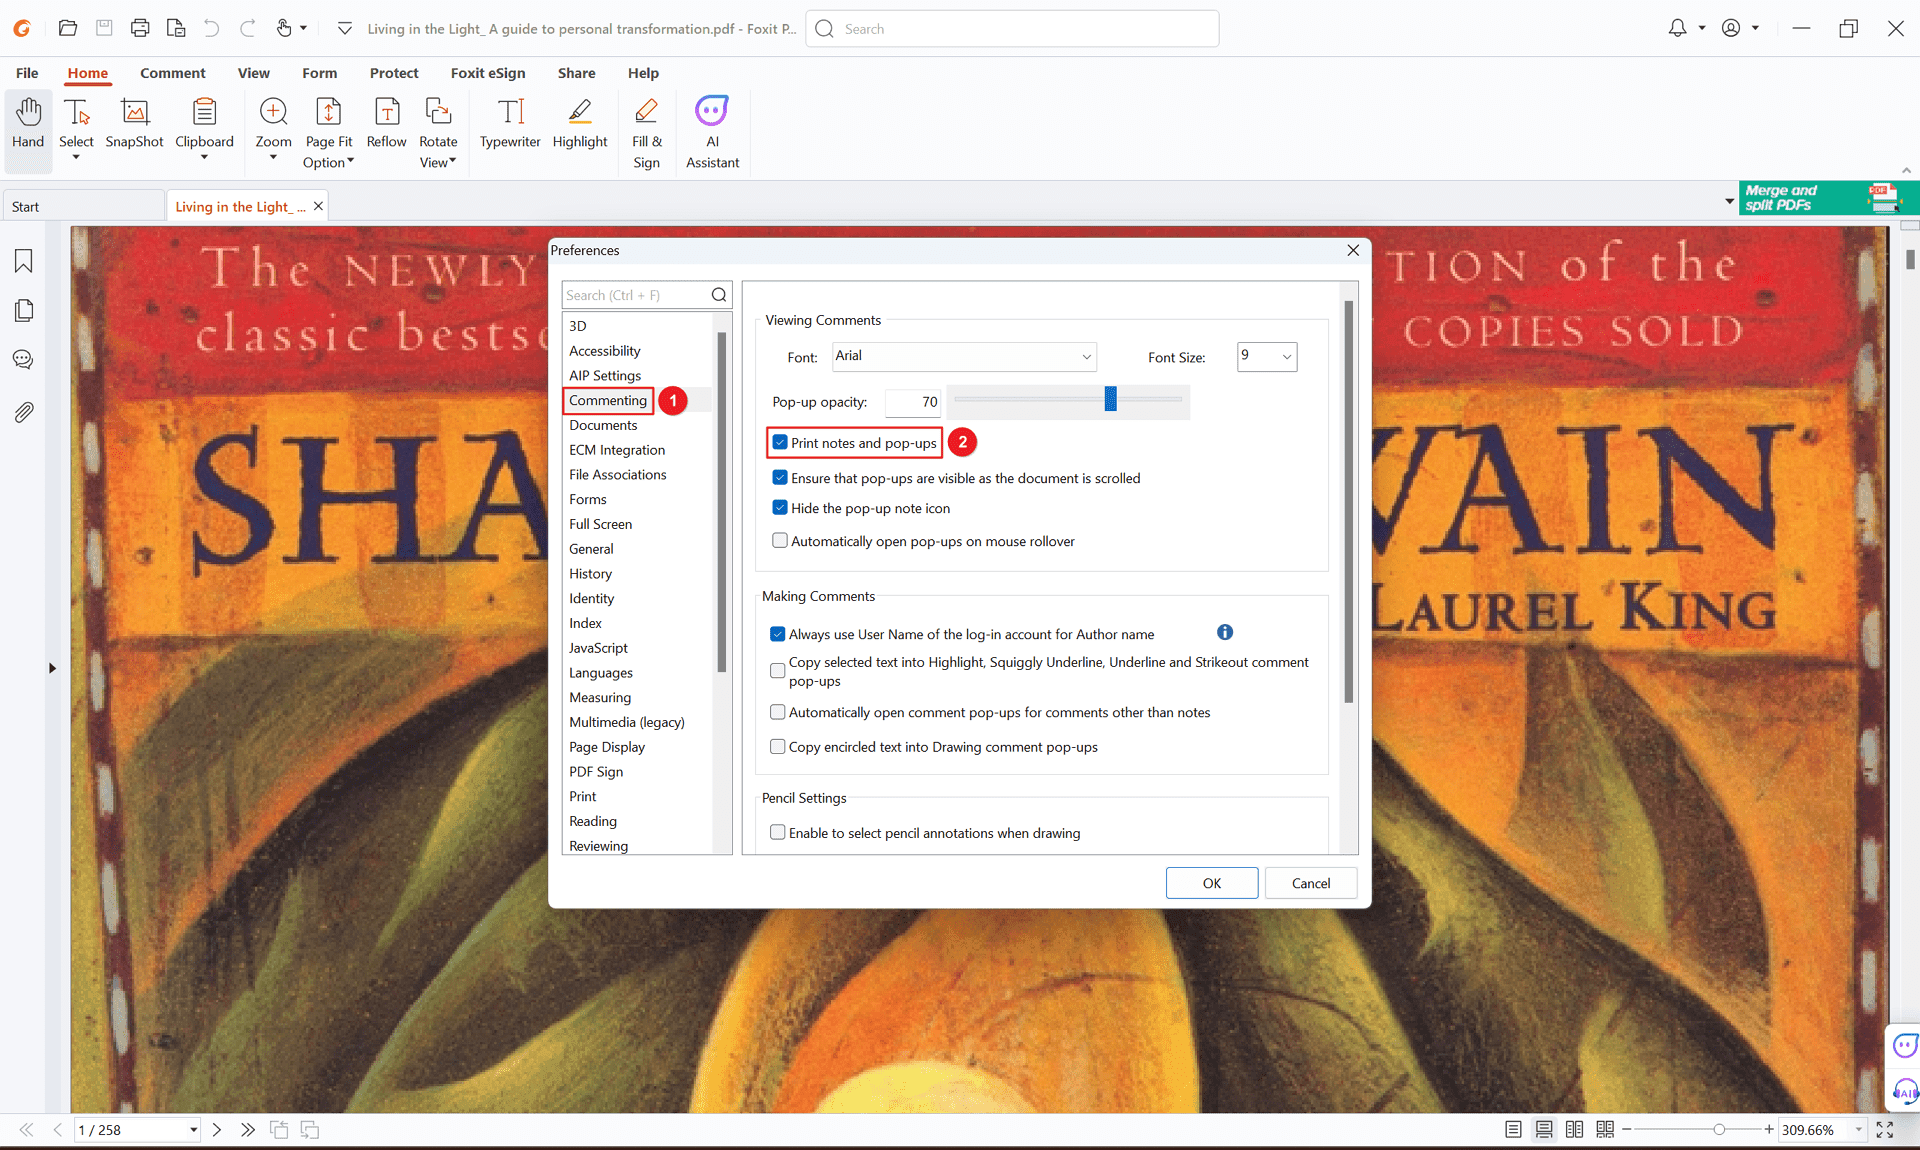 Under Viewing Comments, check the box next to "Print notes and pop-ups". This ensures comments are included during printing.